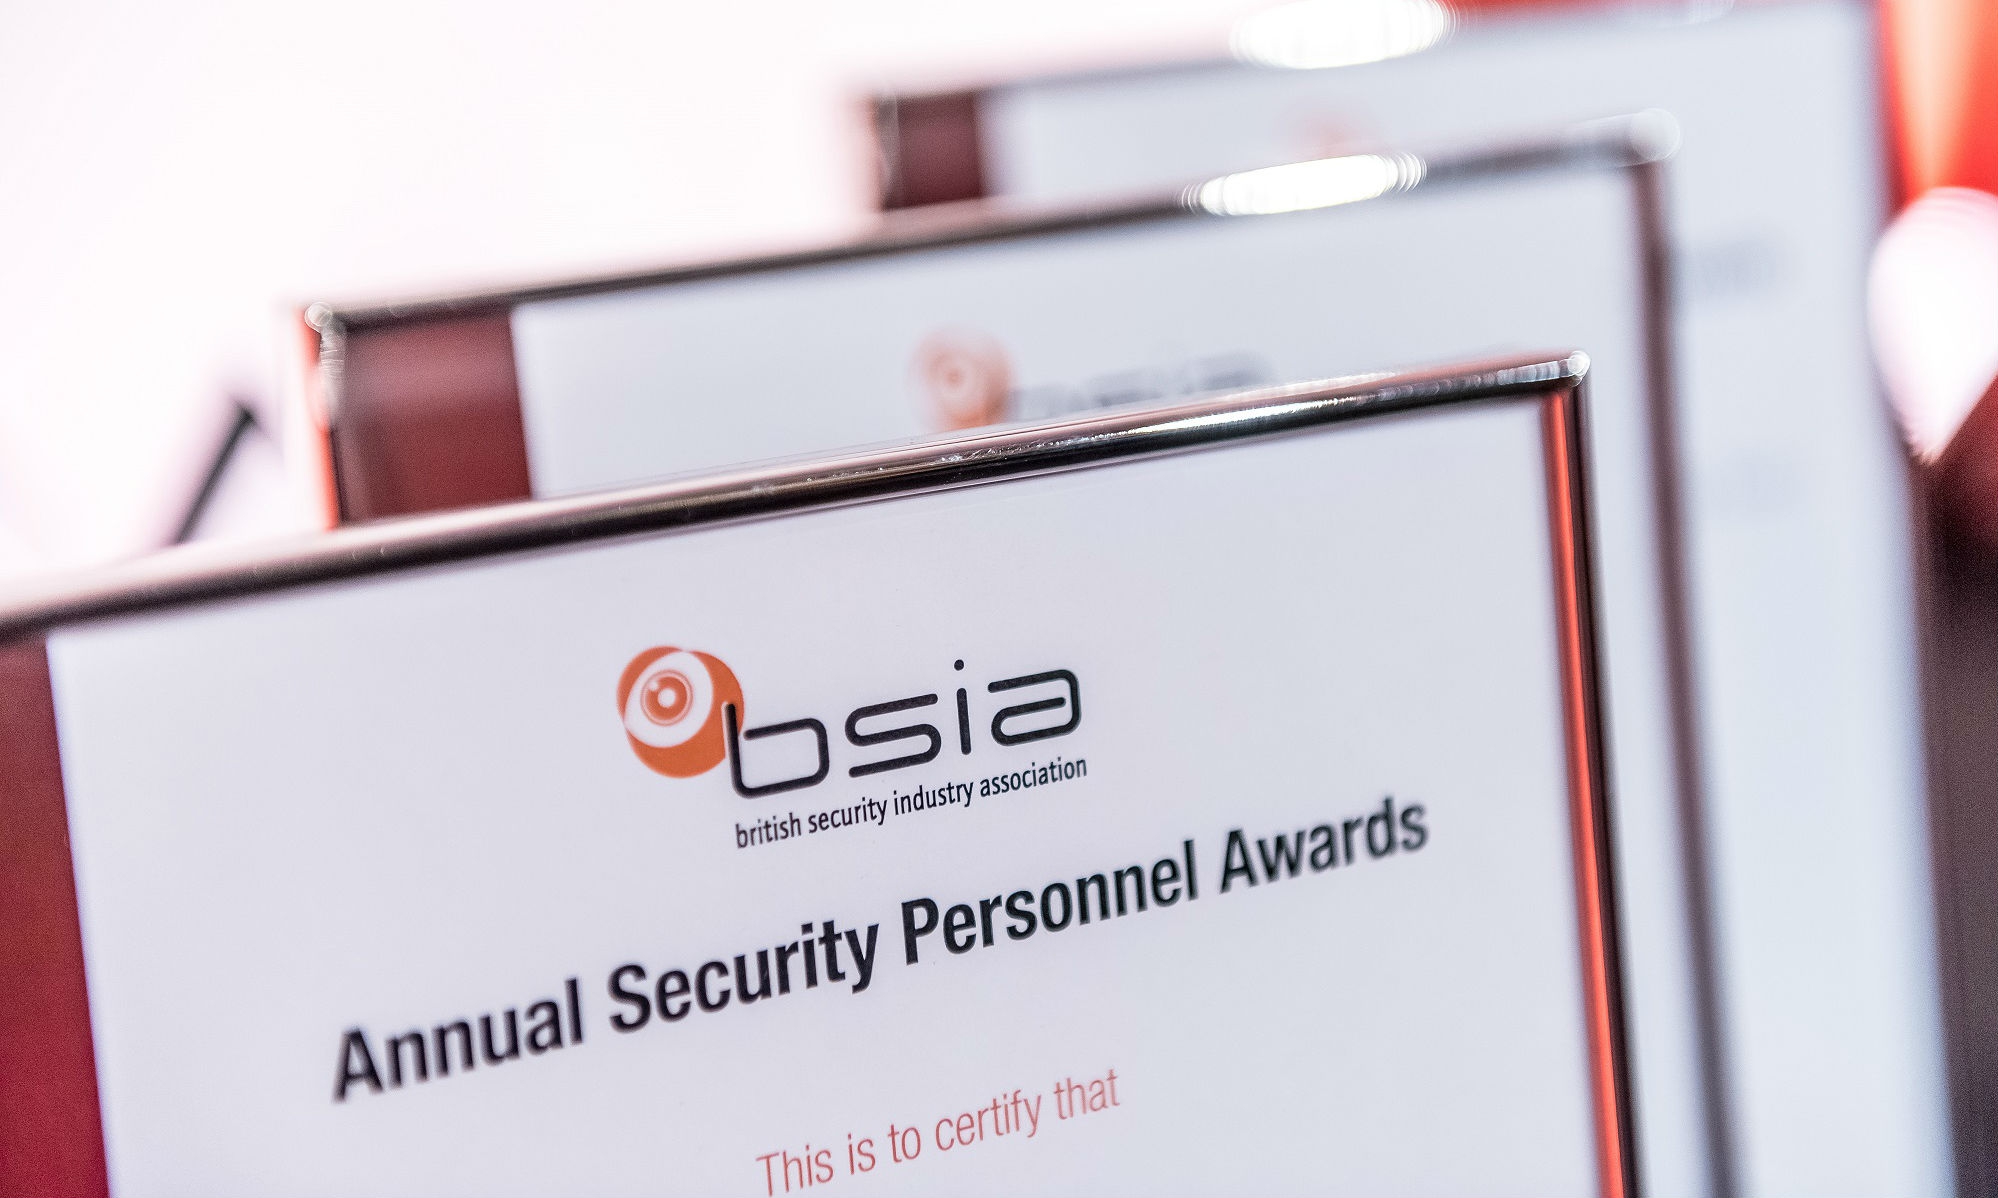 Regional BSIA Security Personnel Awards highlight exceptional industry talent